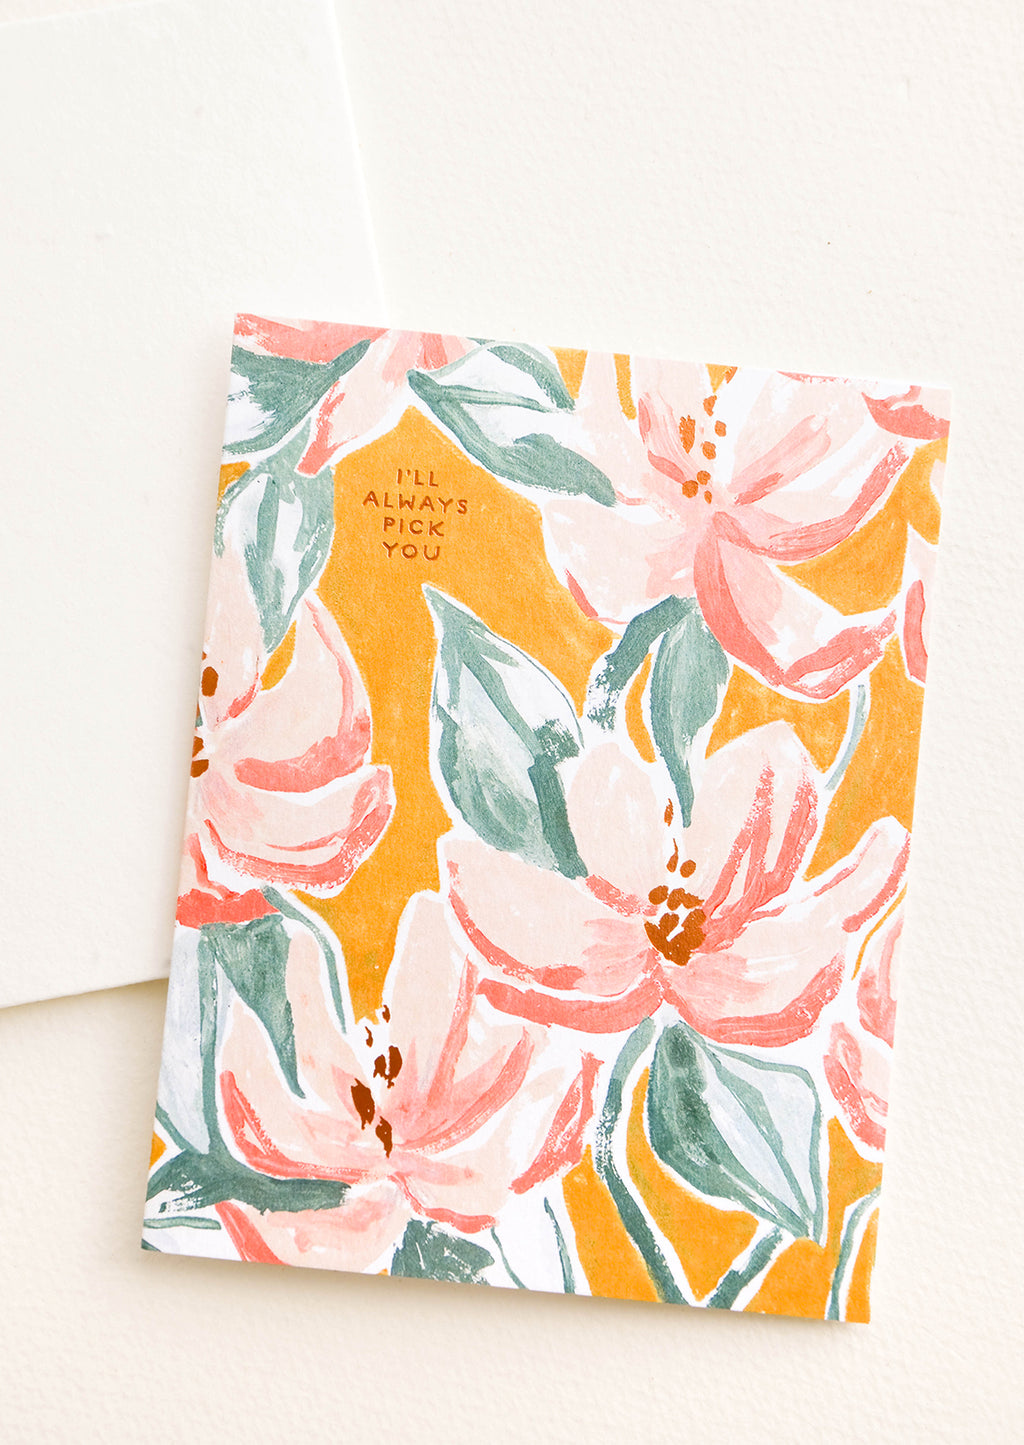 1: Greeting card with painterly floral pattern and copper text "I'll Always Pick You", paired with seed paper envelope